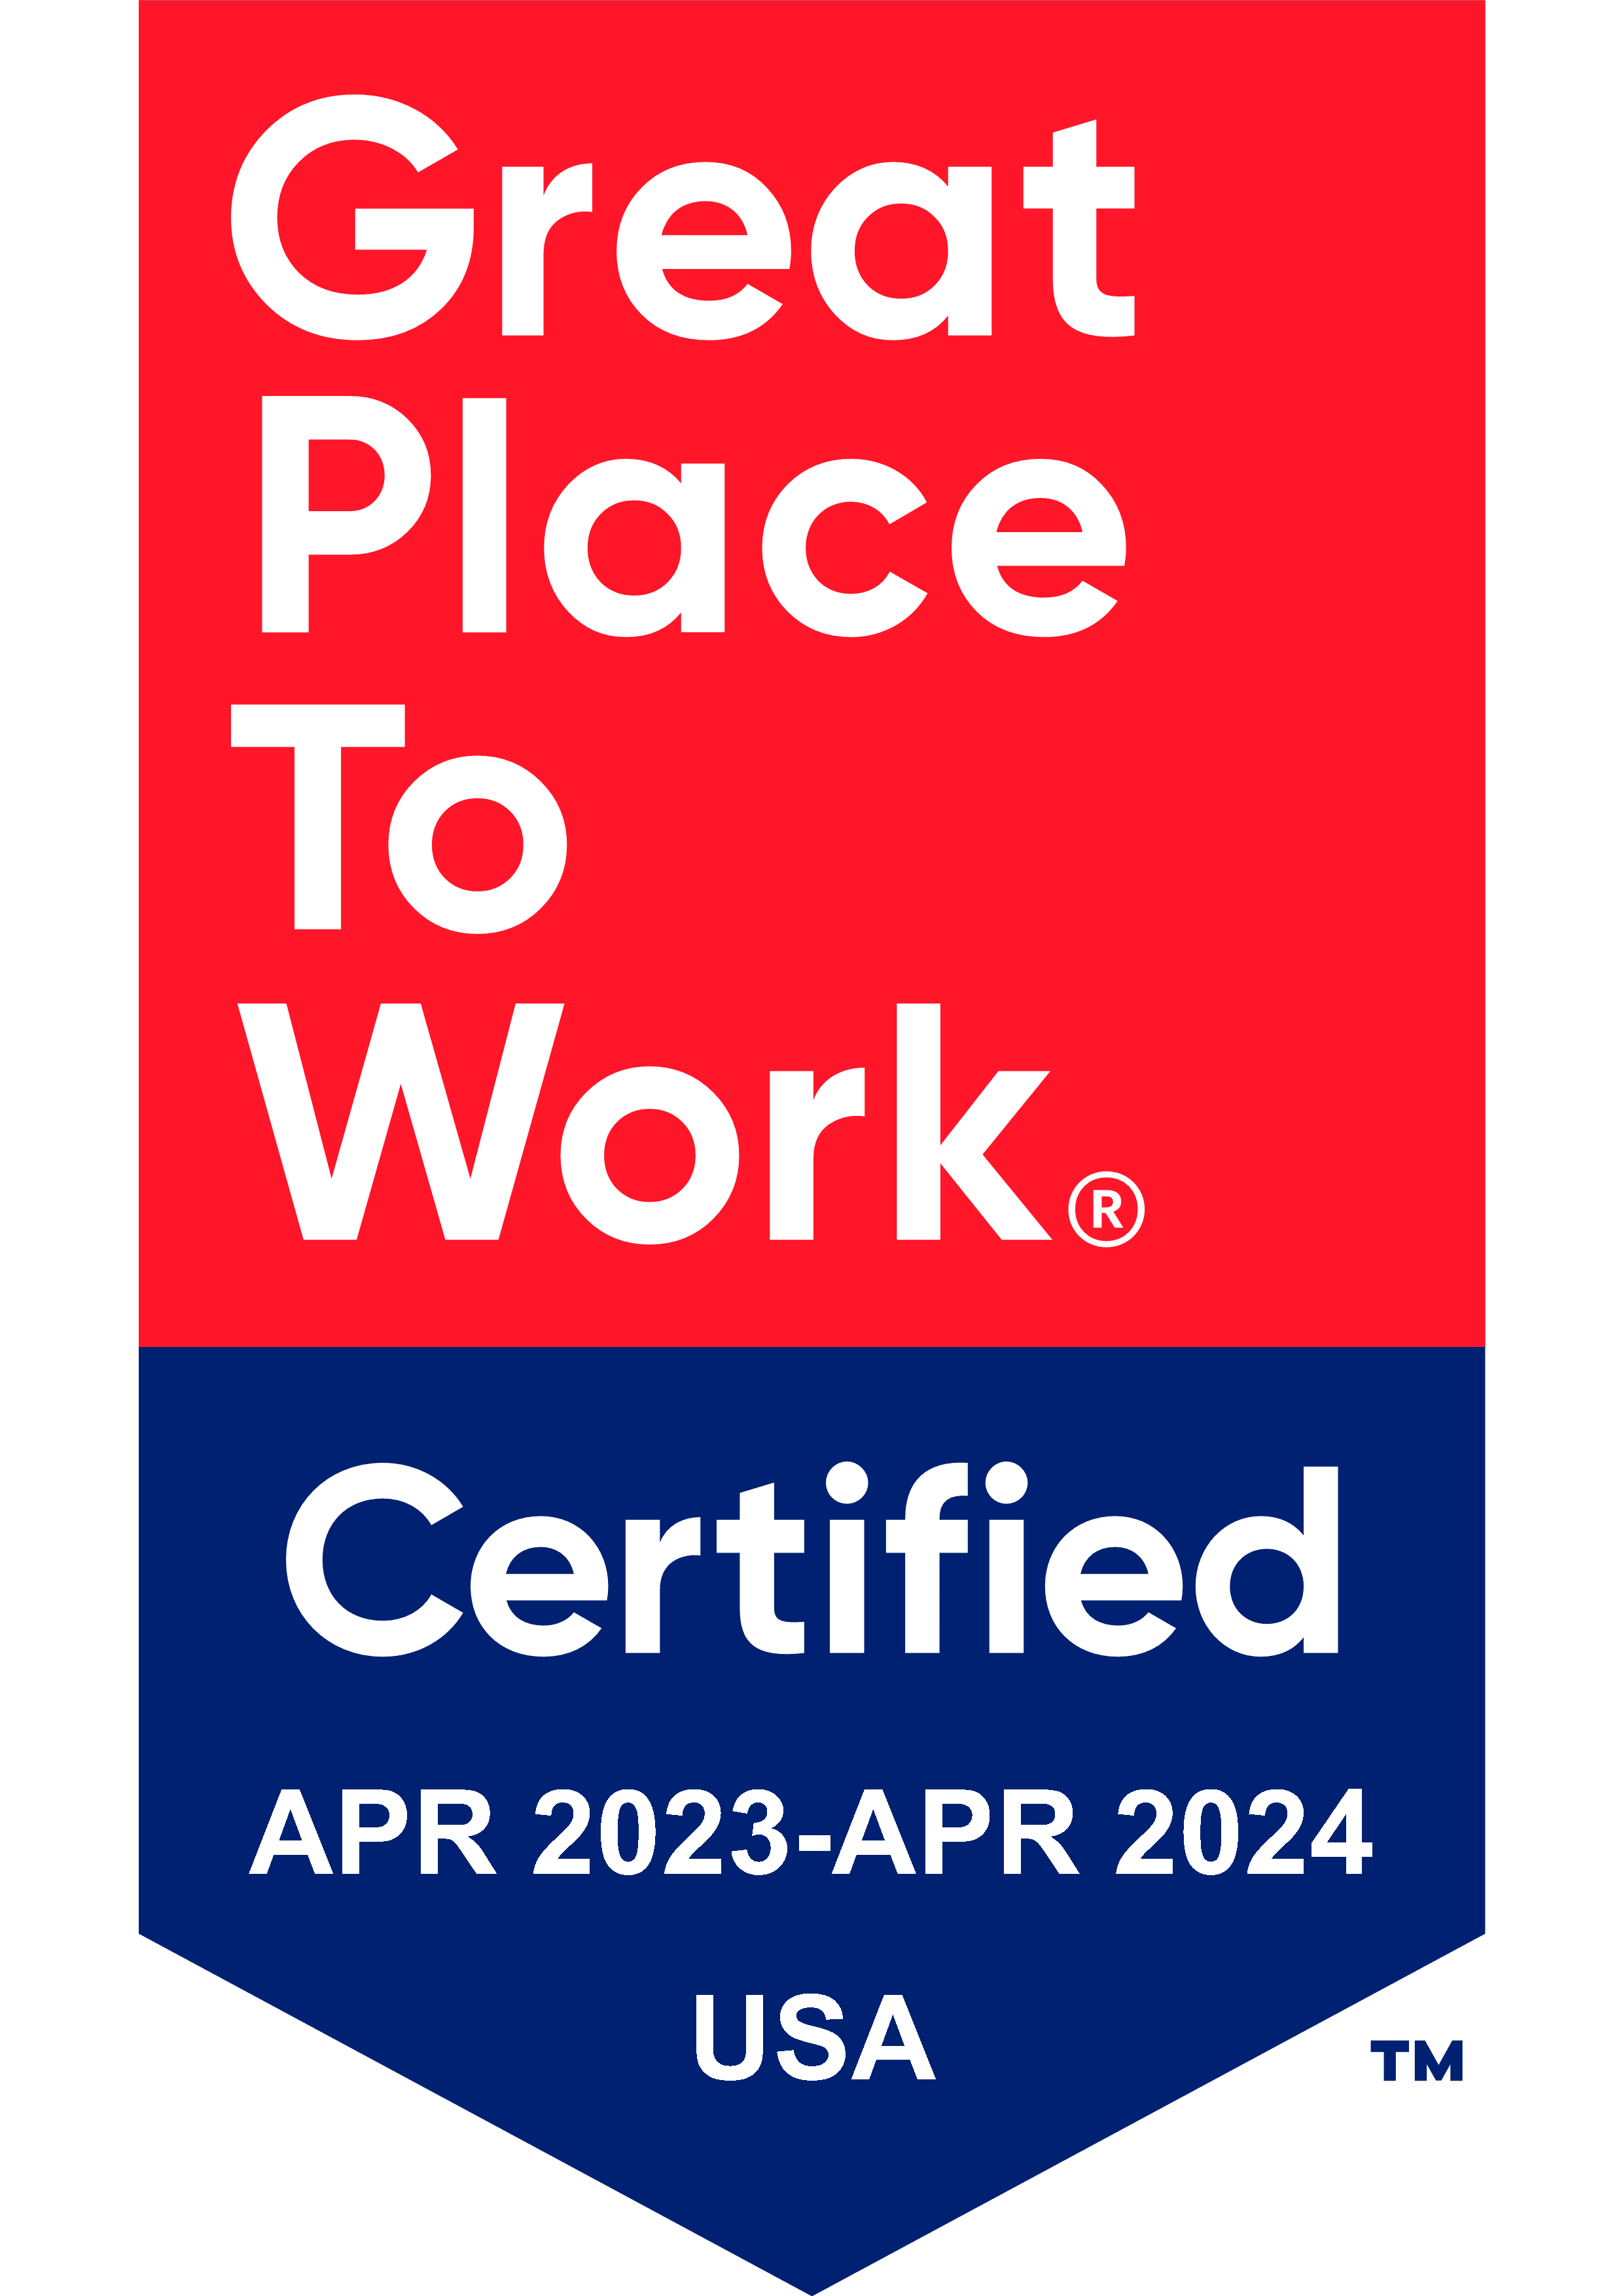 Great place to work badge for Keystone Commons